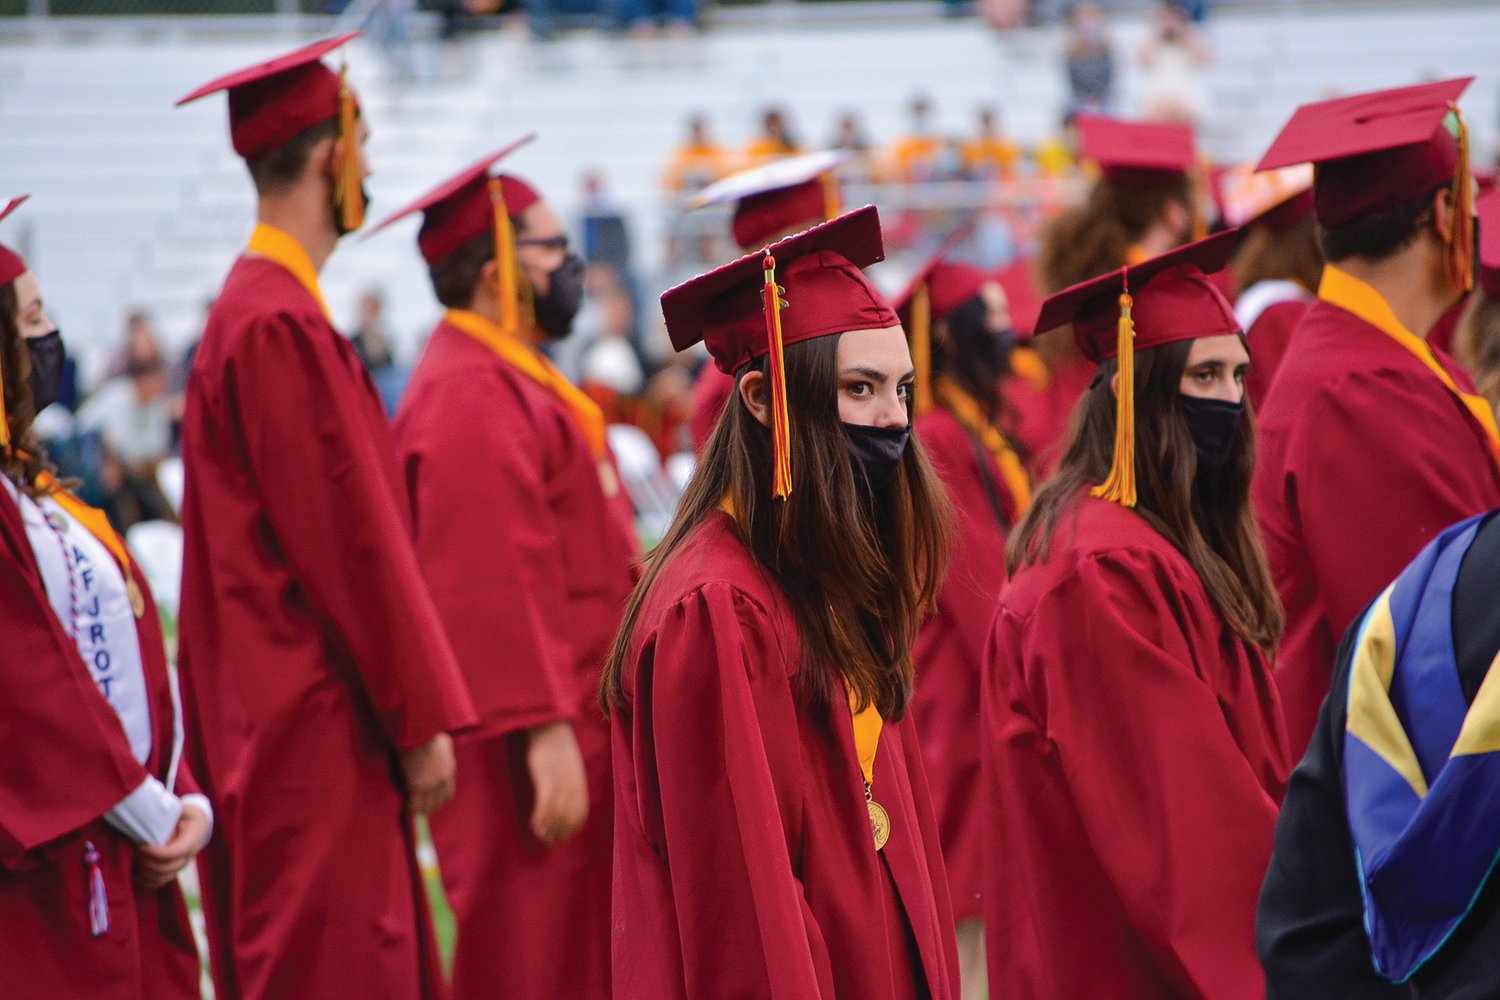 Seniors from Prairie High School lined the field of the Battle Ground District Stadium on June 10 during their graduation ceremony.